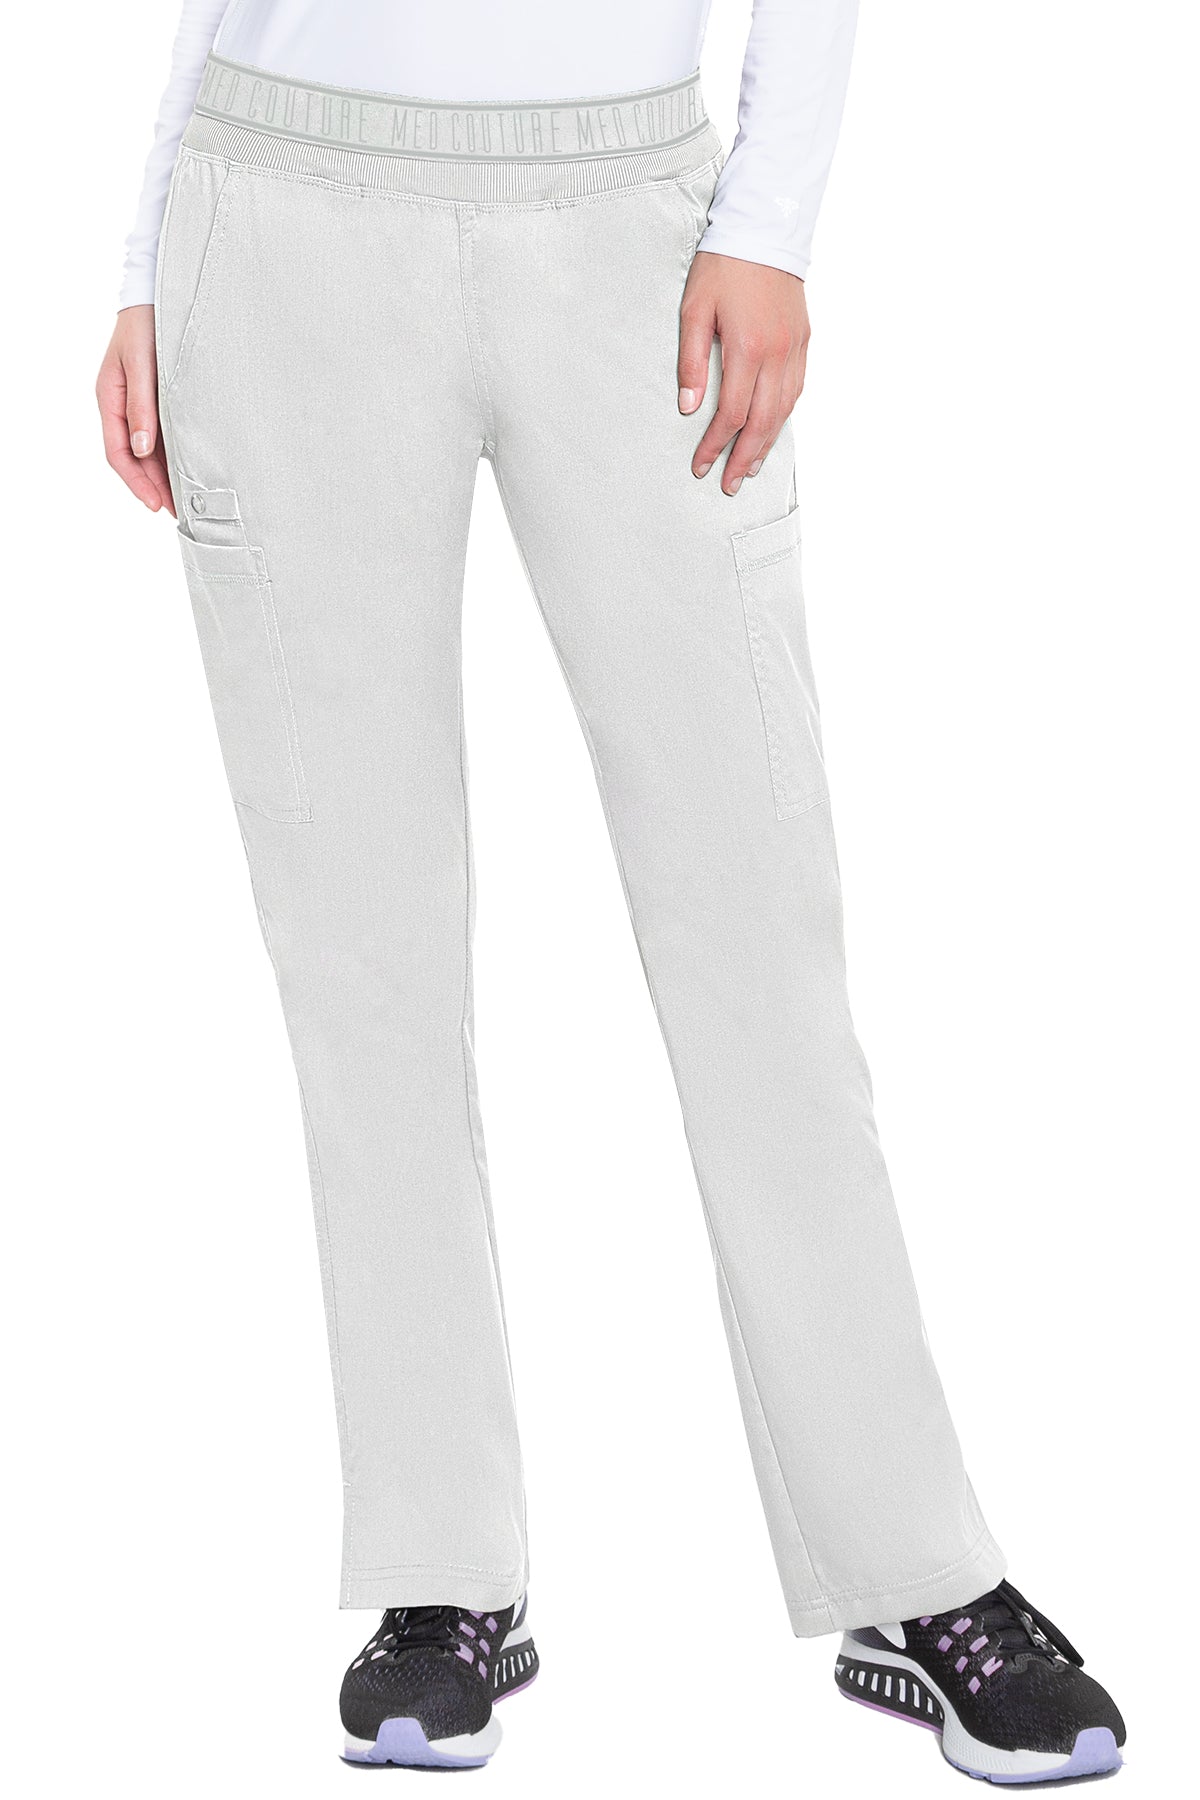 Yoga 2 Cargo Pocket Pant by Med Couture (Regular) XS-5XL/ White